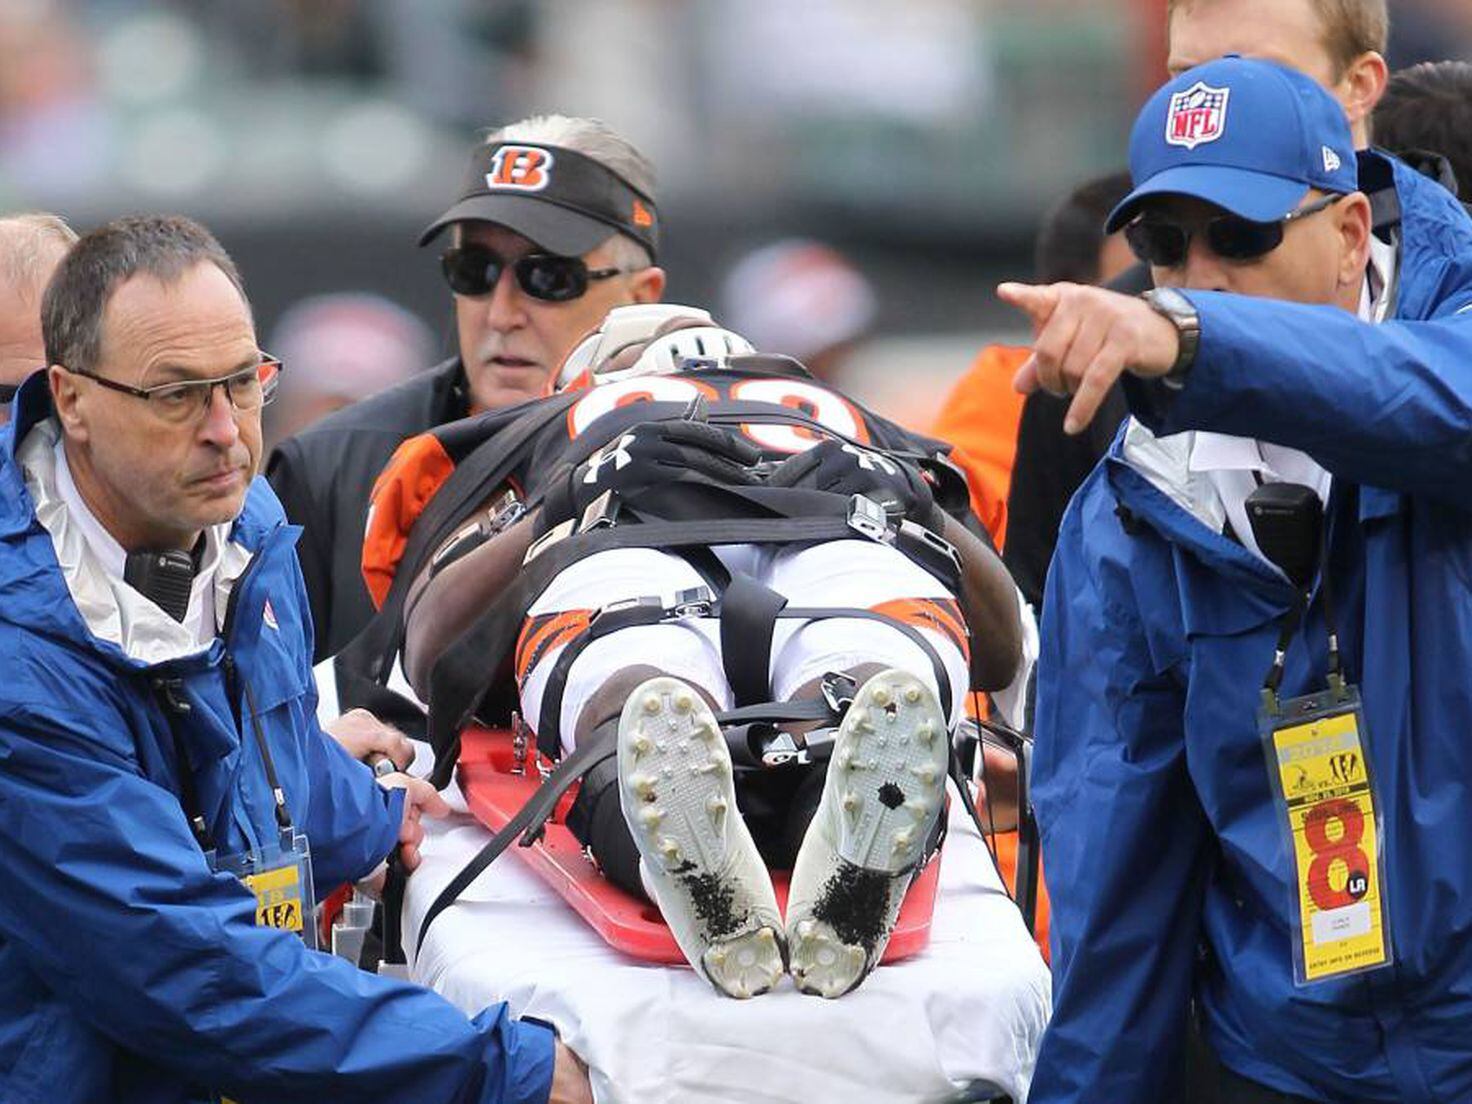 CTE Cases in Soccer Players Raise Questions About Safety of